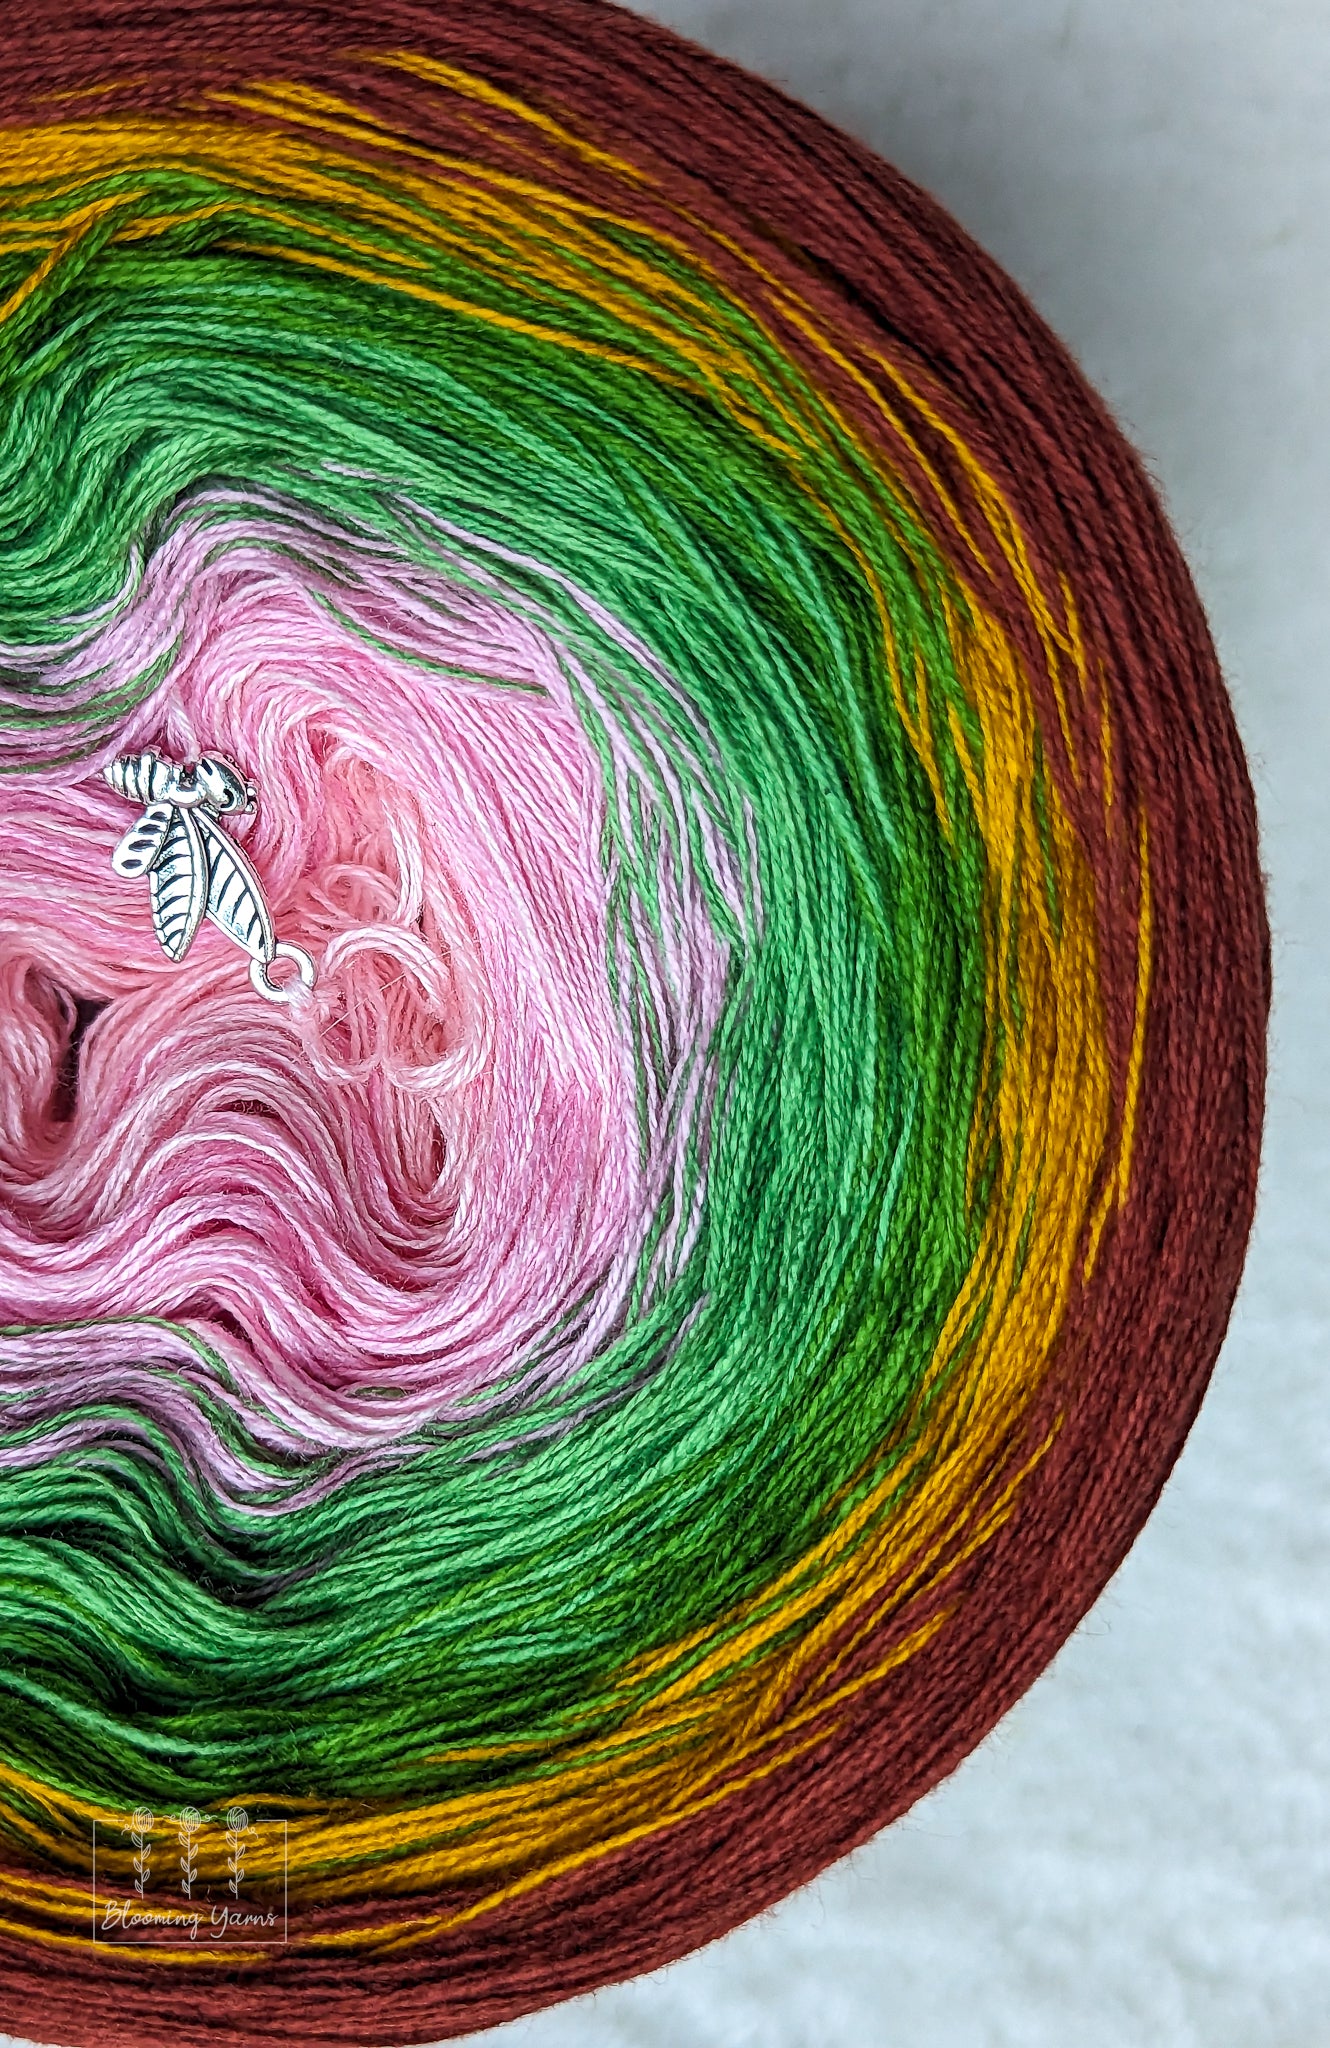 "Rose bushes" gradient ombre yarn cake created by Ancy-Fancy